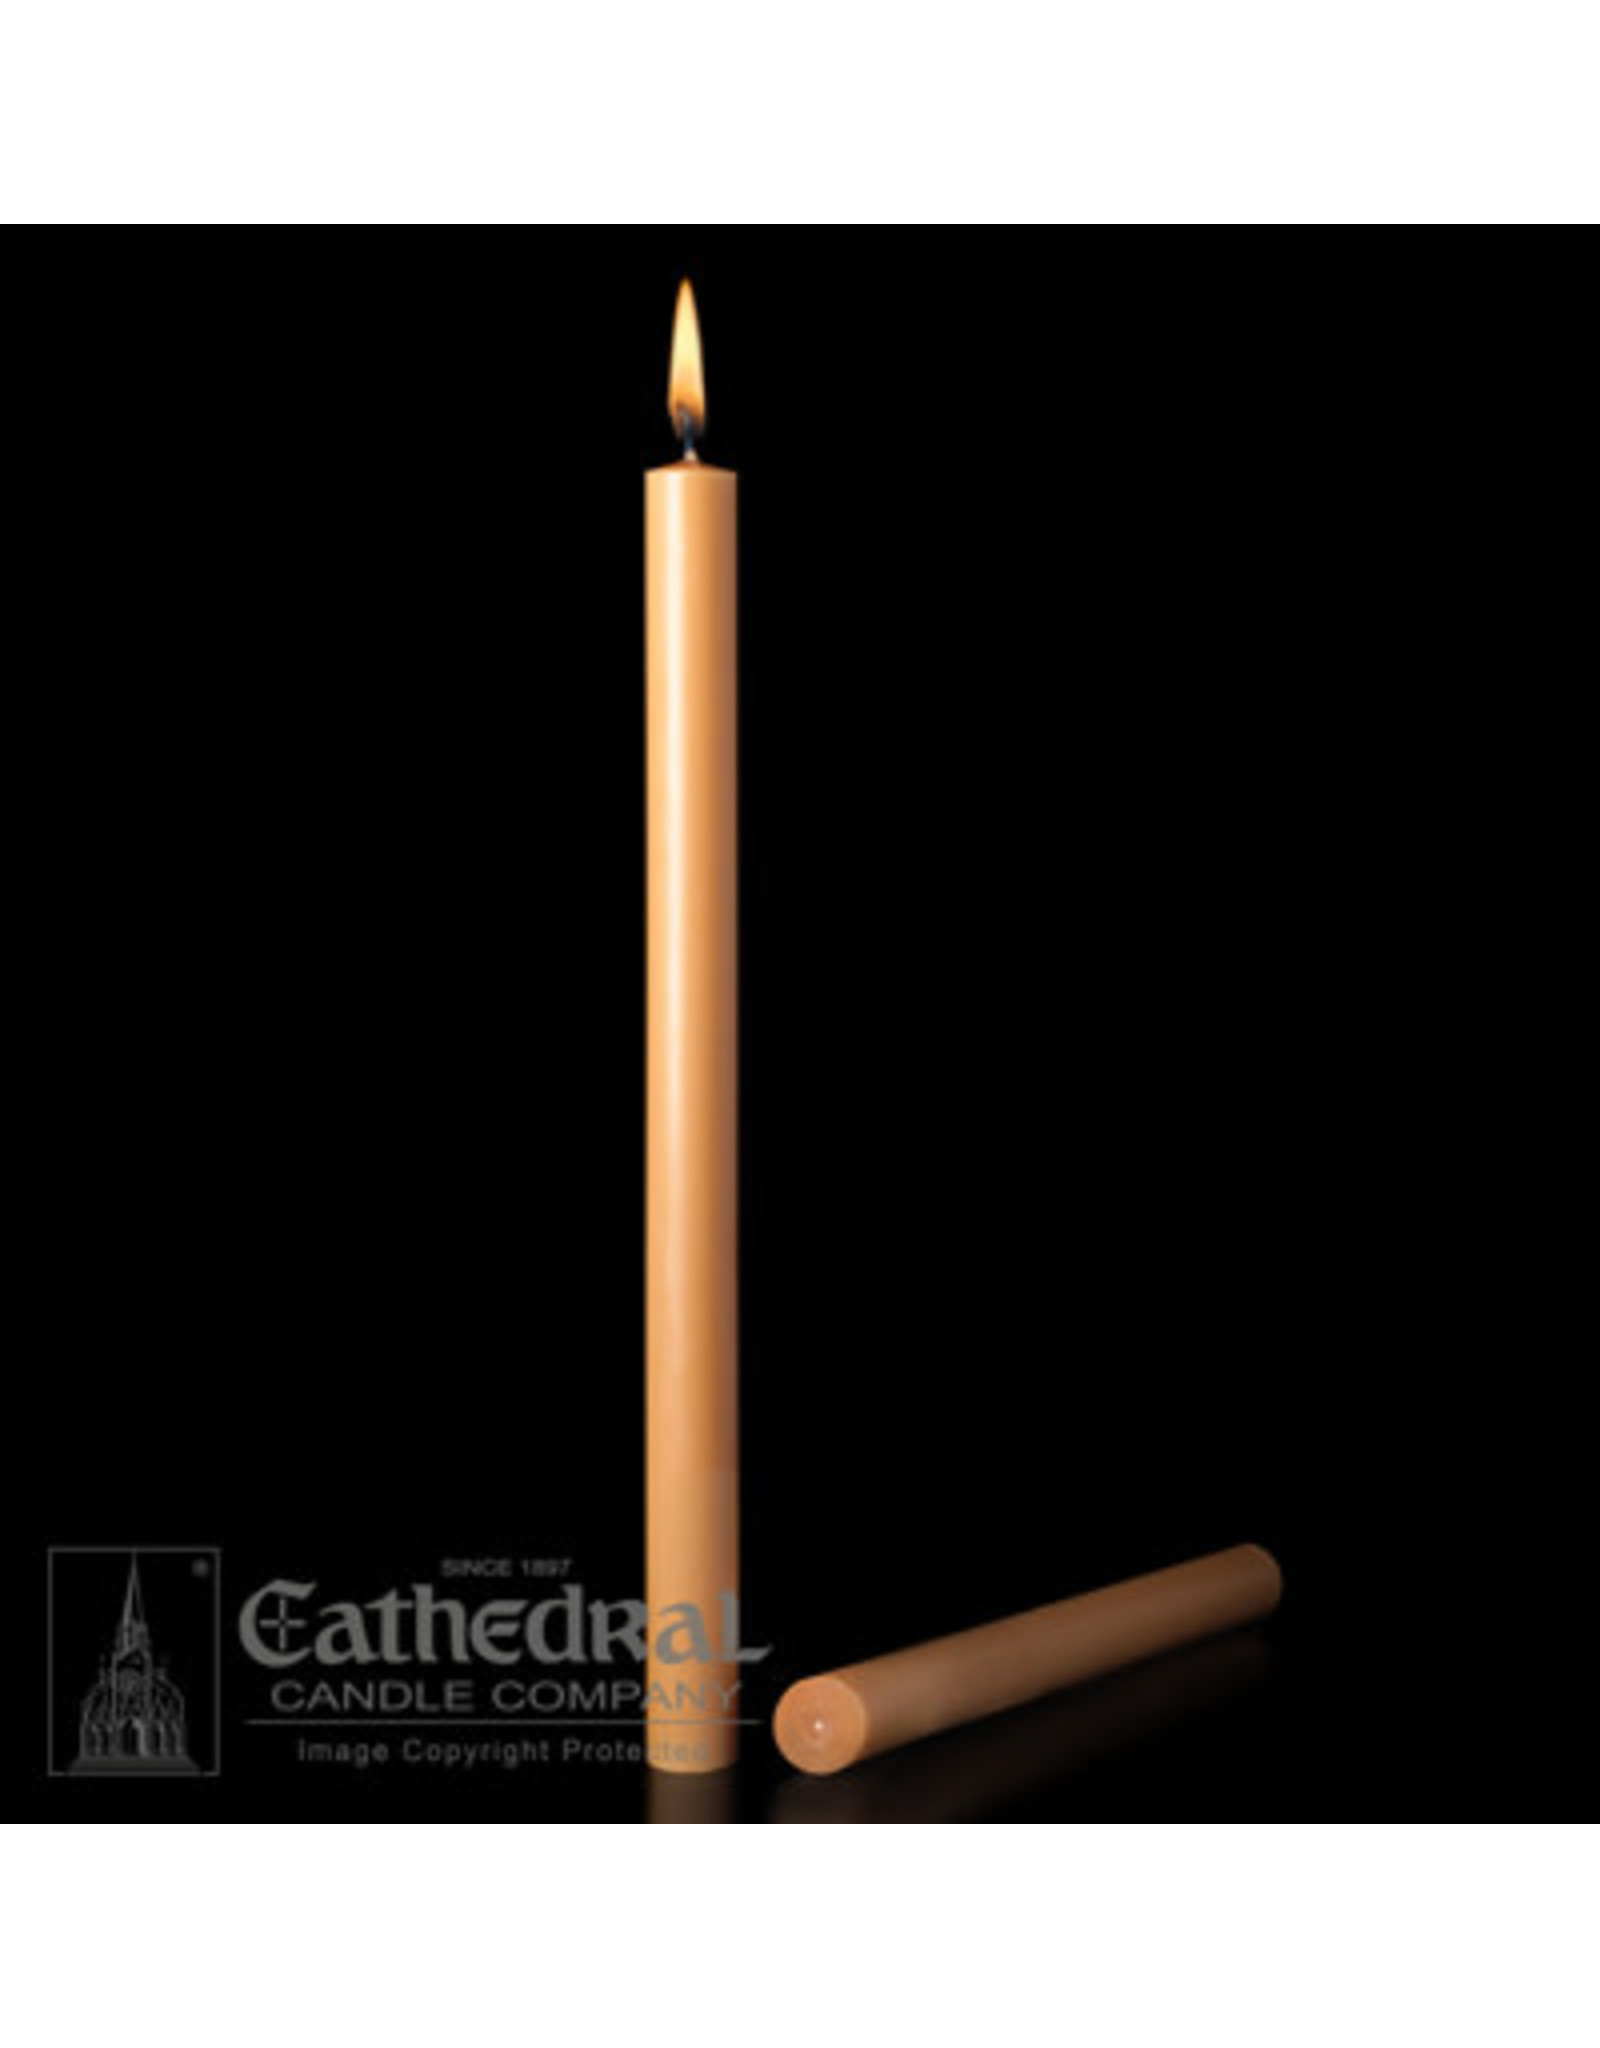 Unbleached Altar Candles 51% Beeswax 1.25"x17" PE (12)